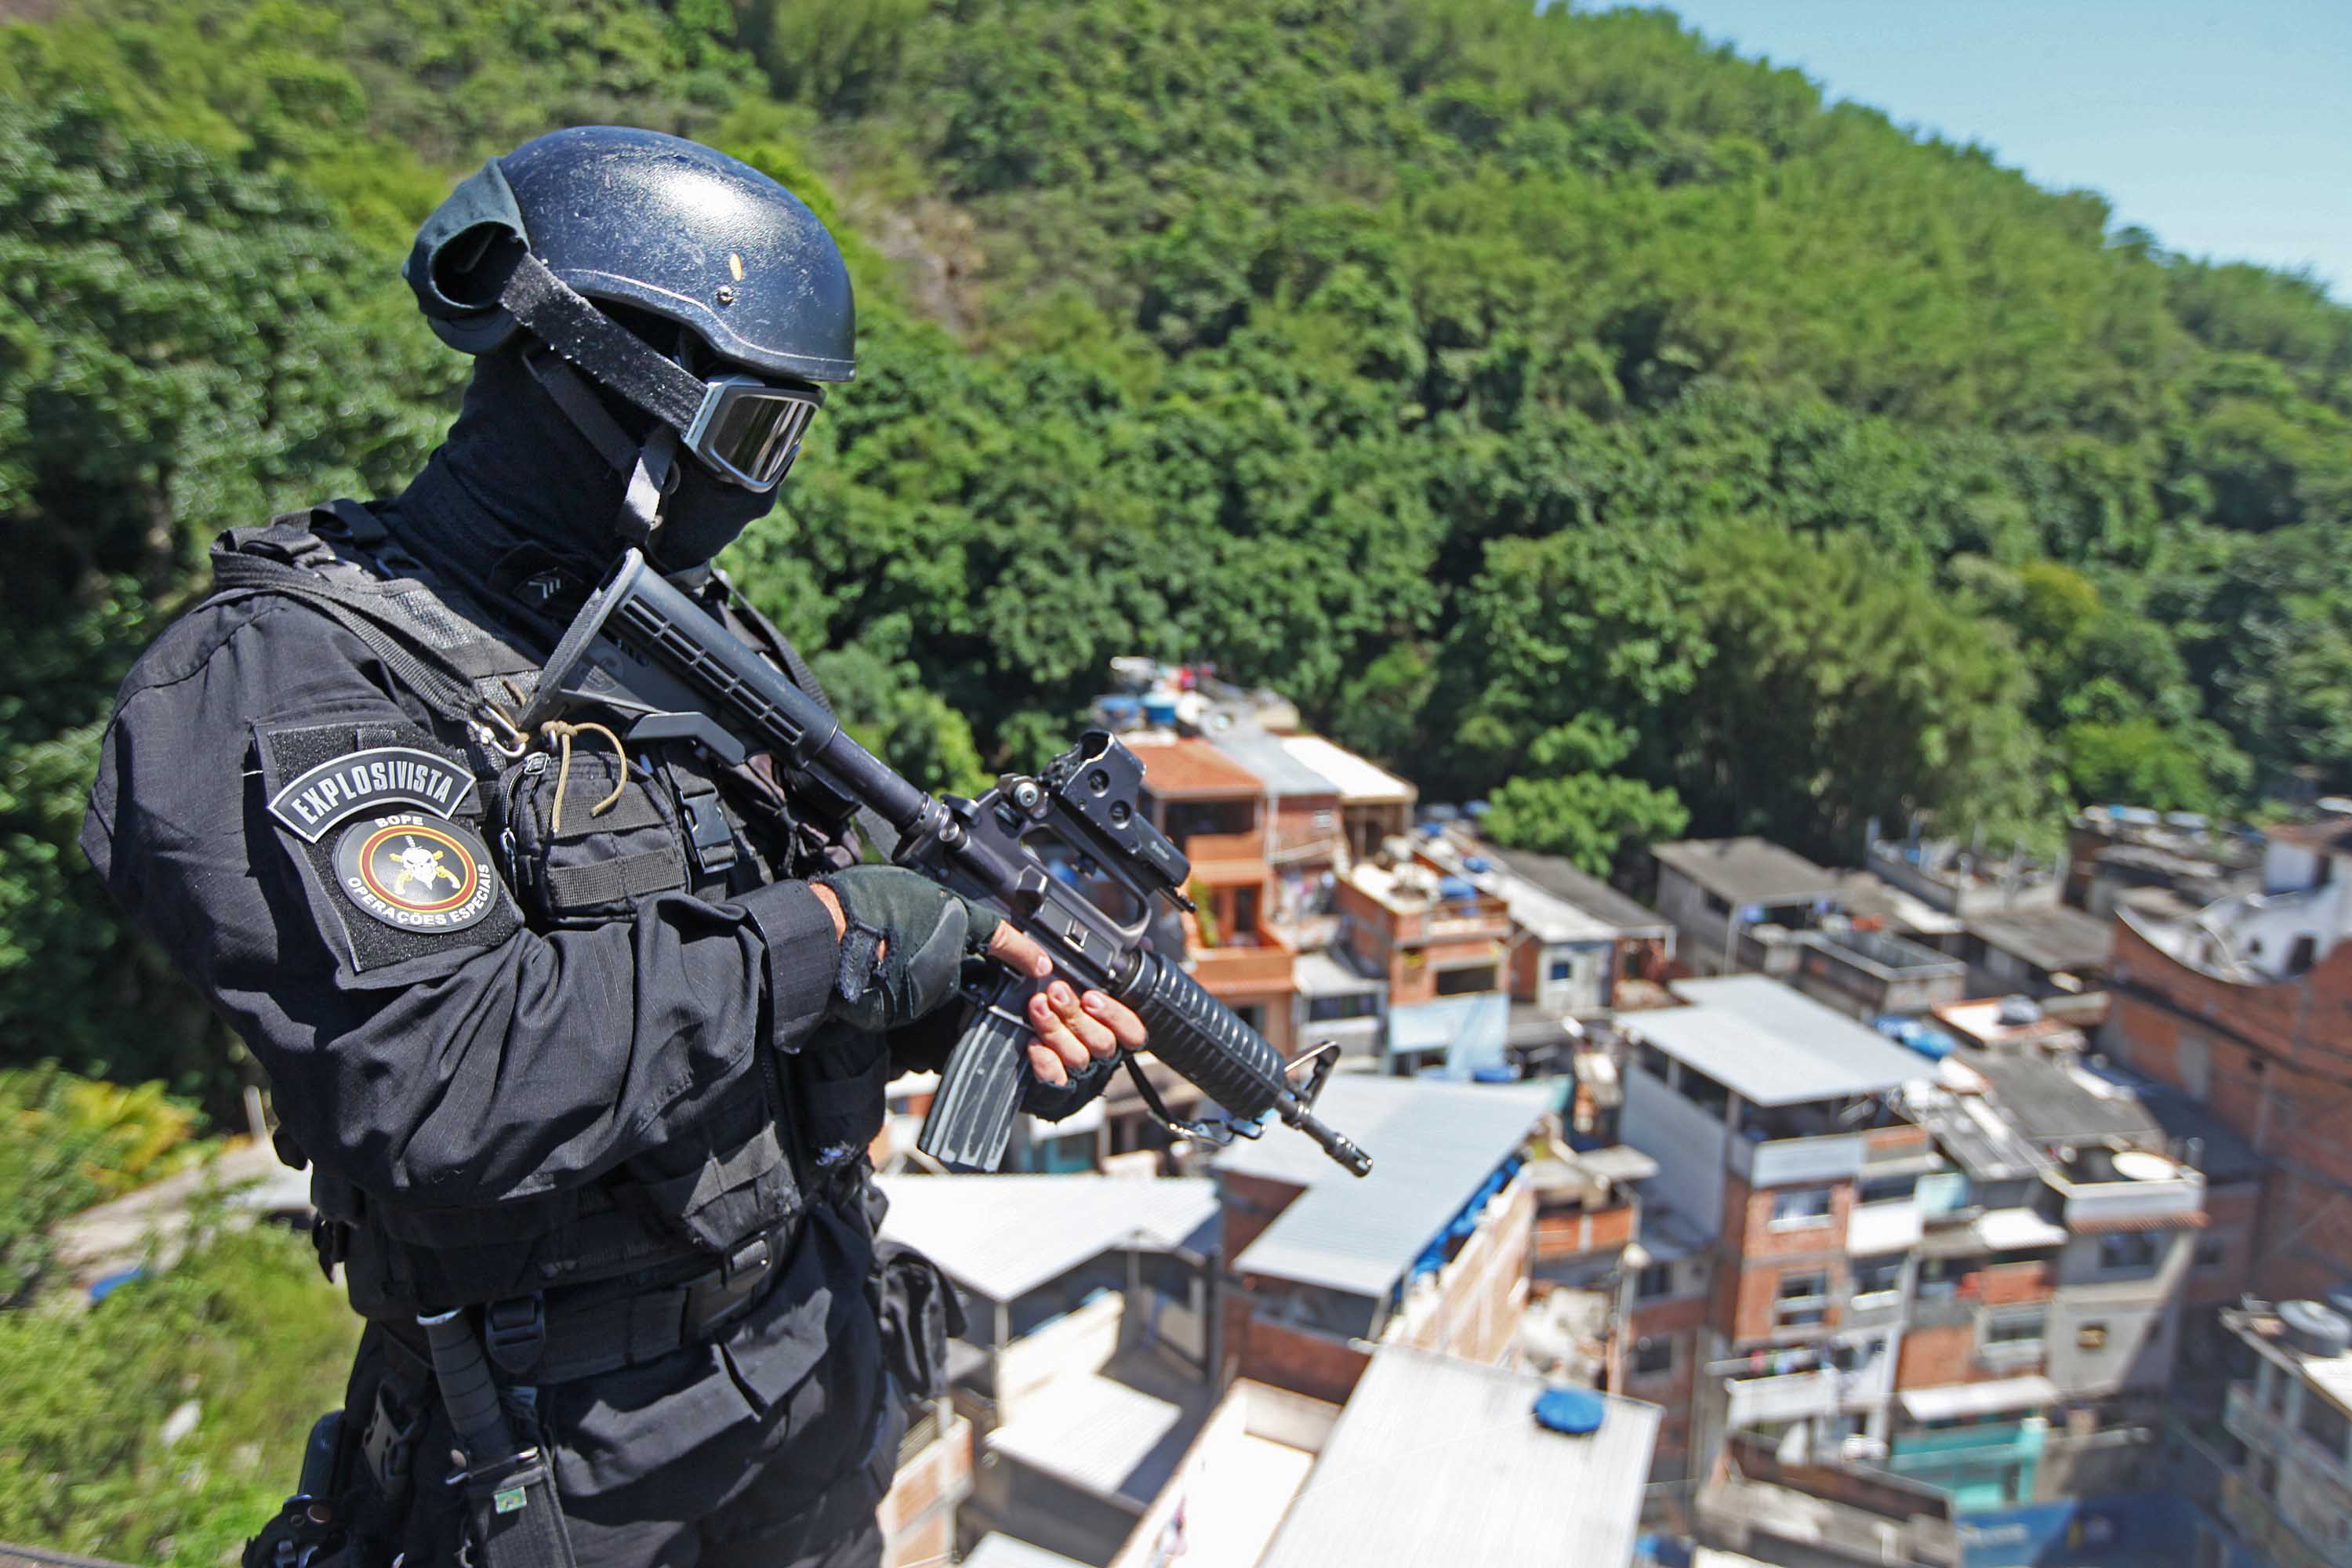 Rio Authorizes Use of Masks by Military Police Again